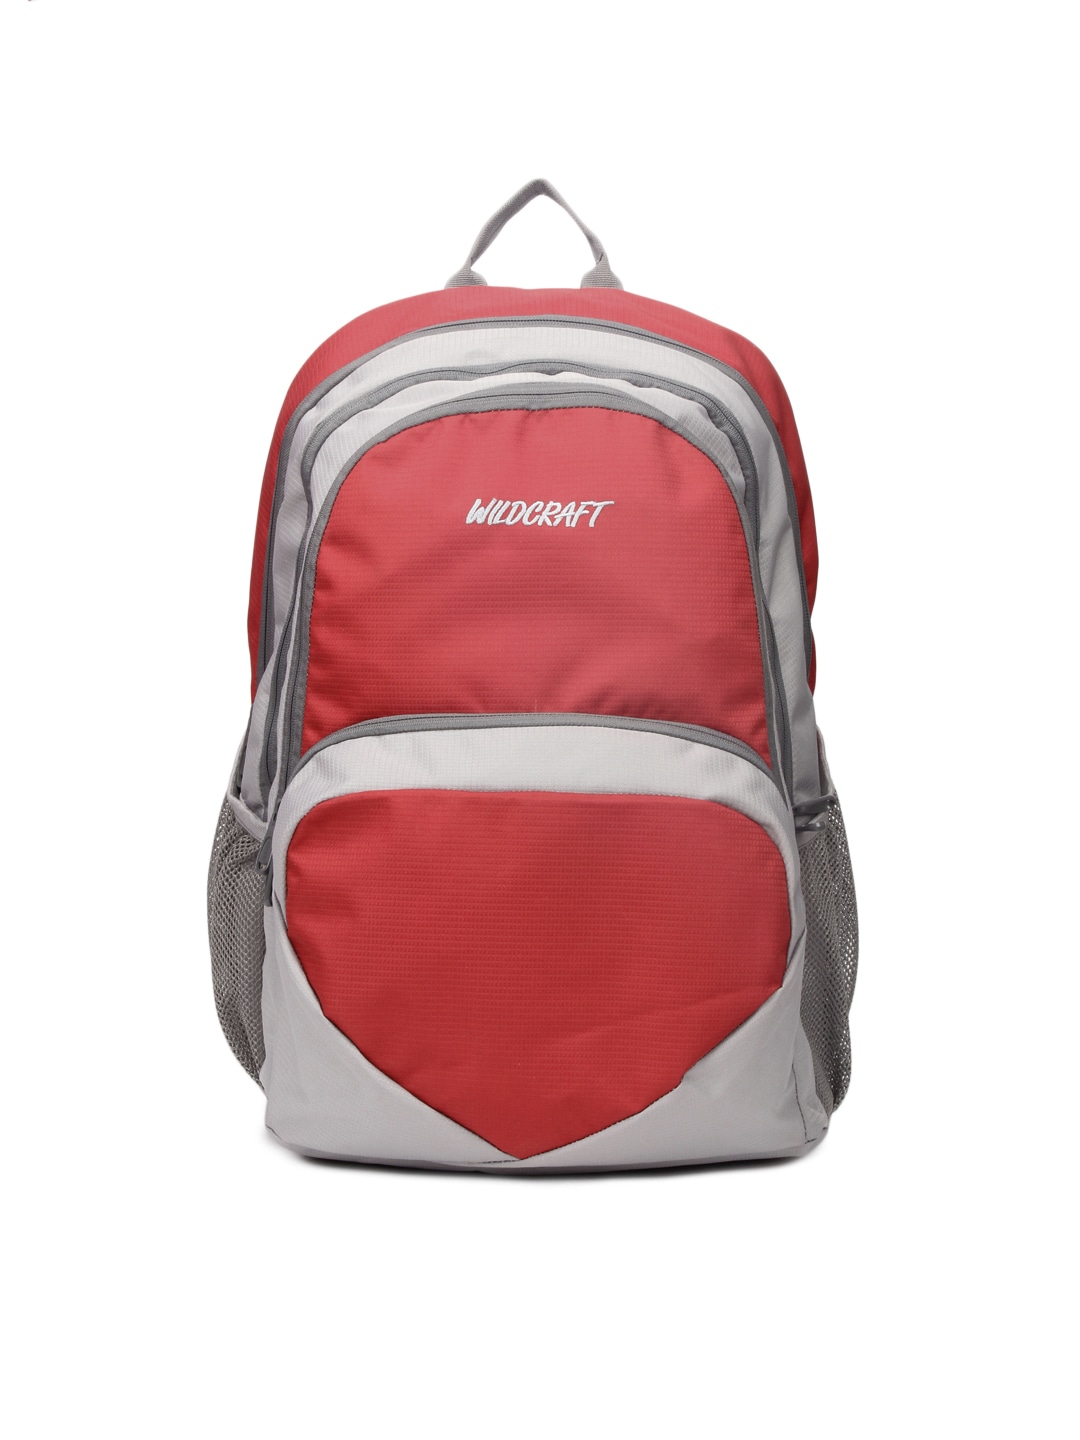 Wildcraft Unisex Red and Grey Backpack